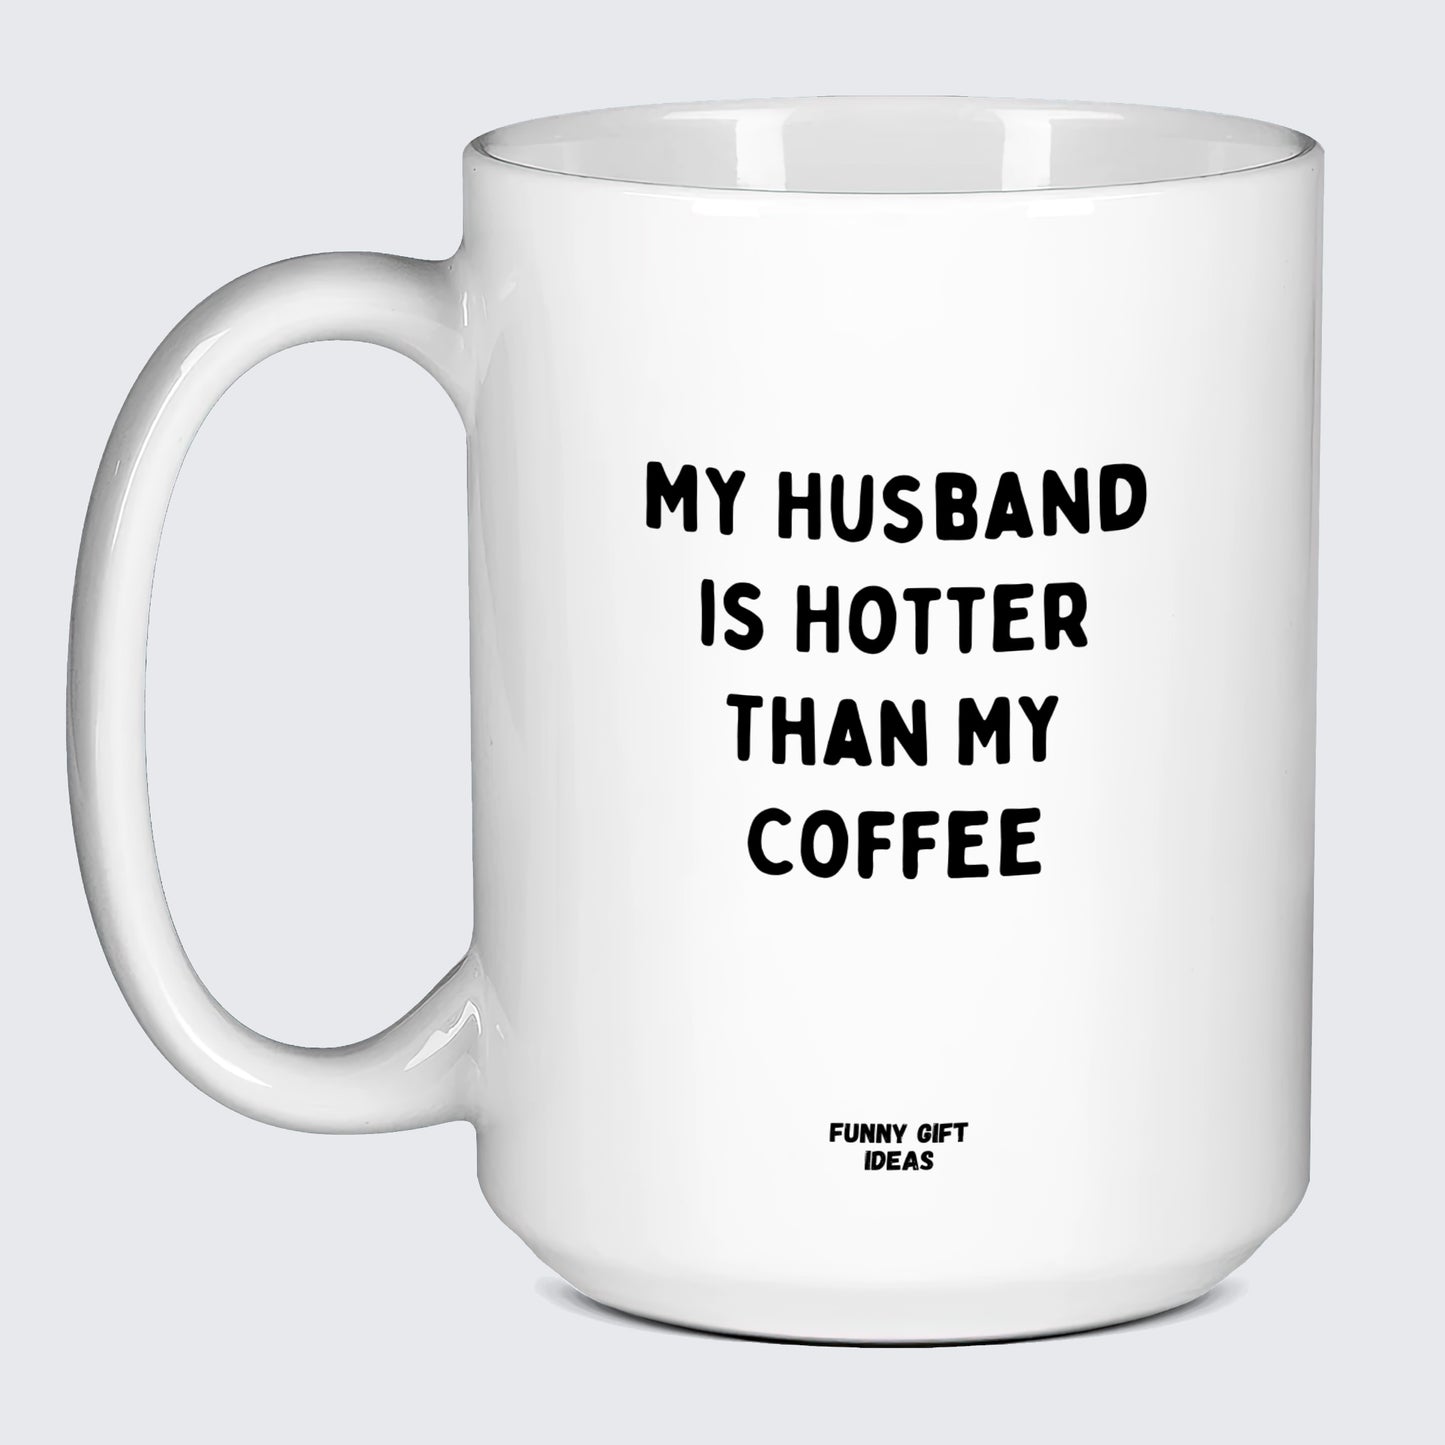 Funny Coffee Mugs My Husband is Hotter Than My Coffee - Funny Gift Ideas